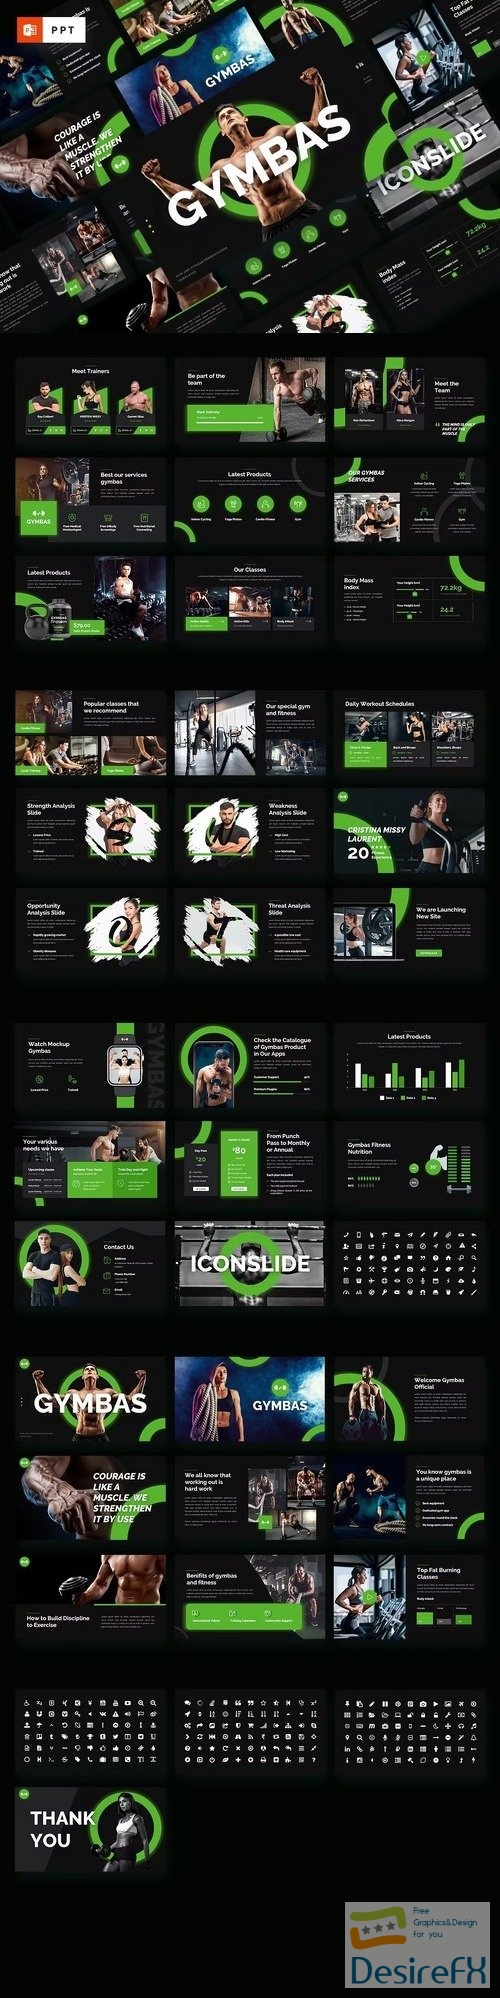 GYMBAS - GYM & Fitness Powerpoint Template